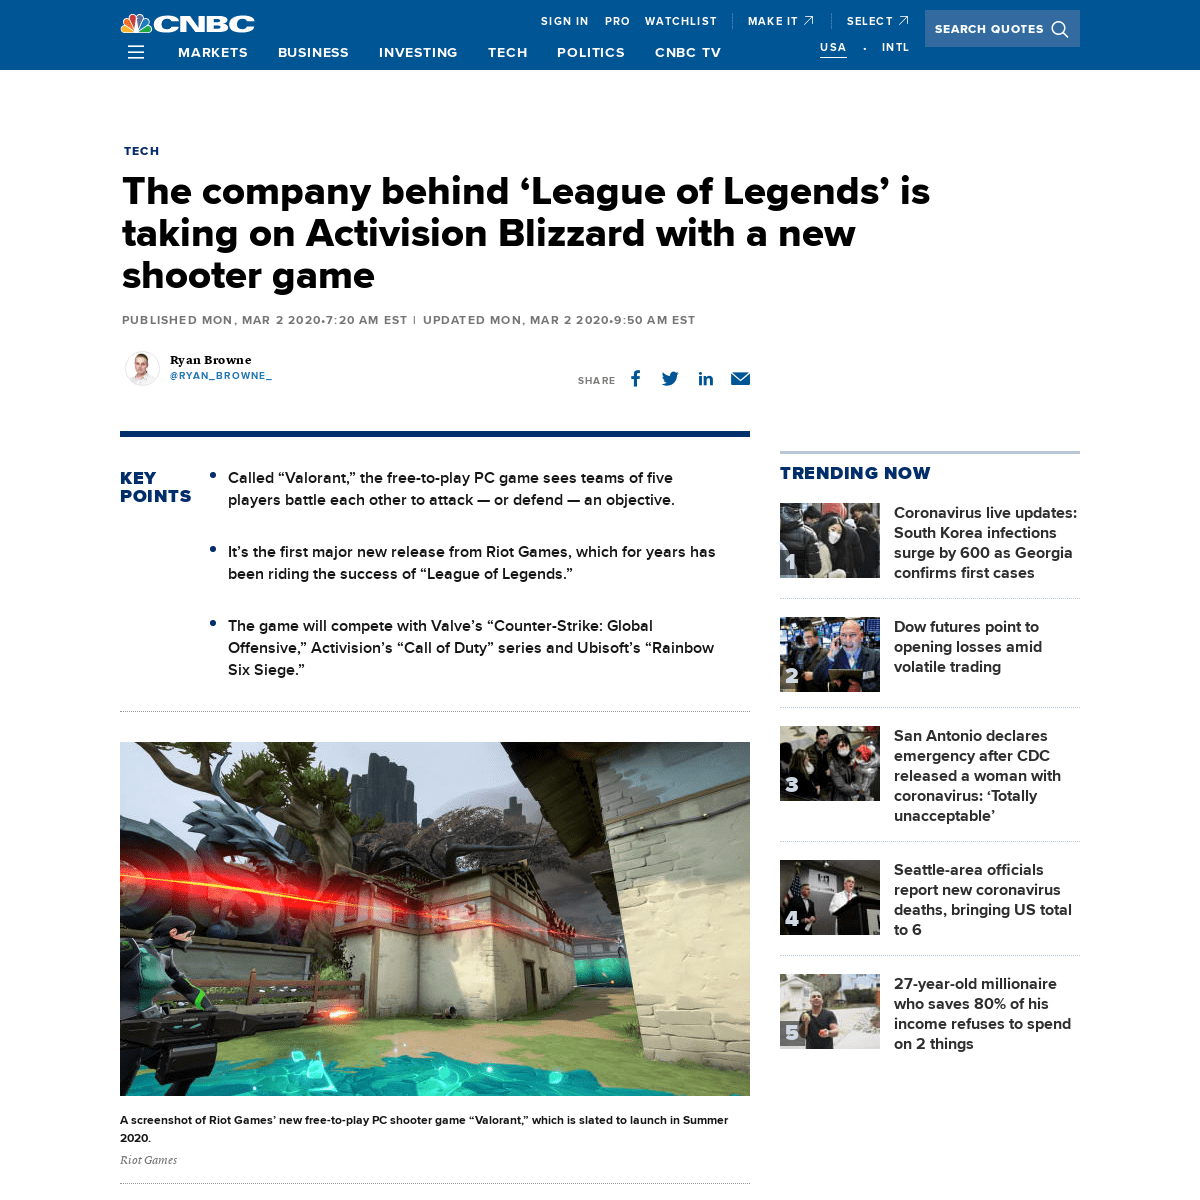 A complete backup of www.cnbc.com/2020/03/02/riot-games-reveals-tactical-fps-game-valorant-to-take-on-activision.html